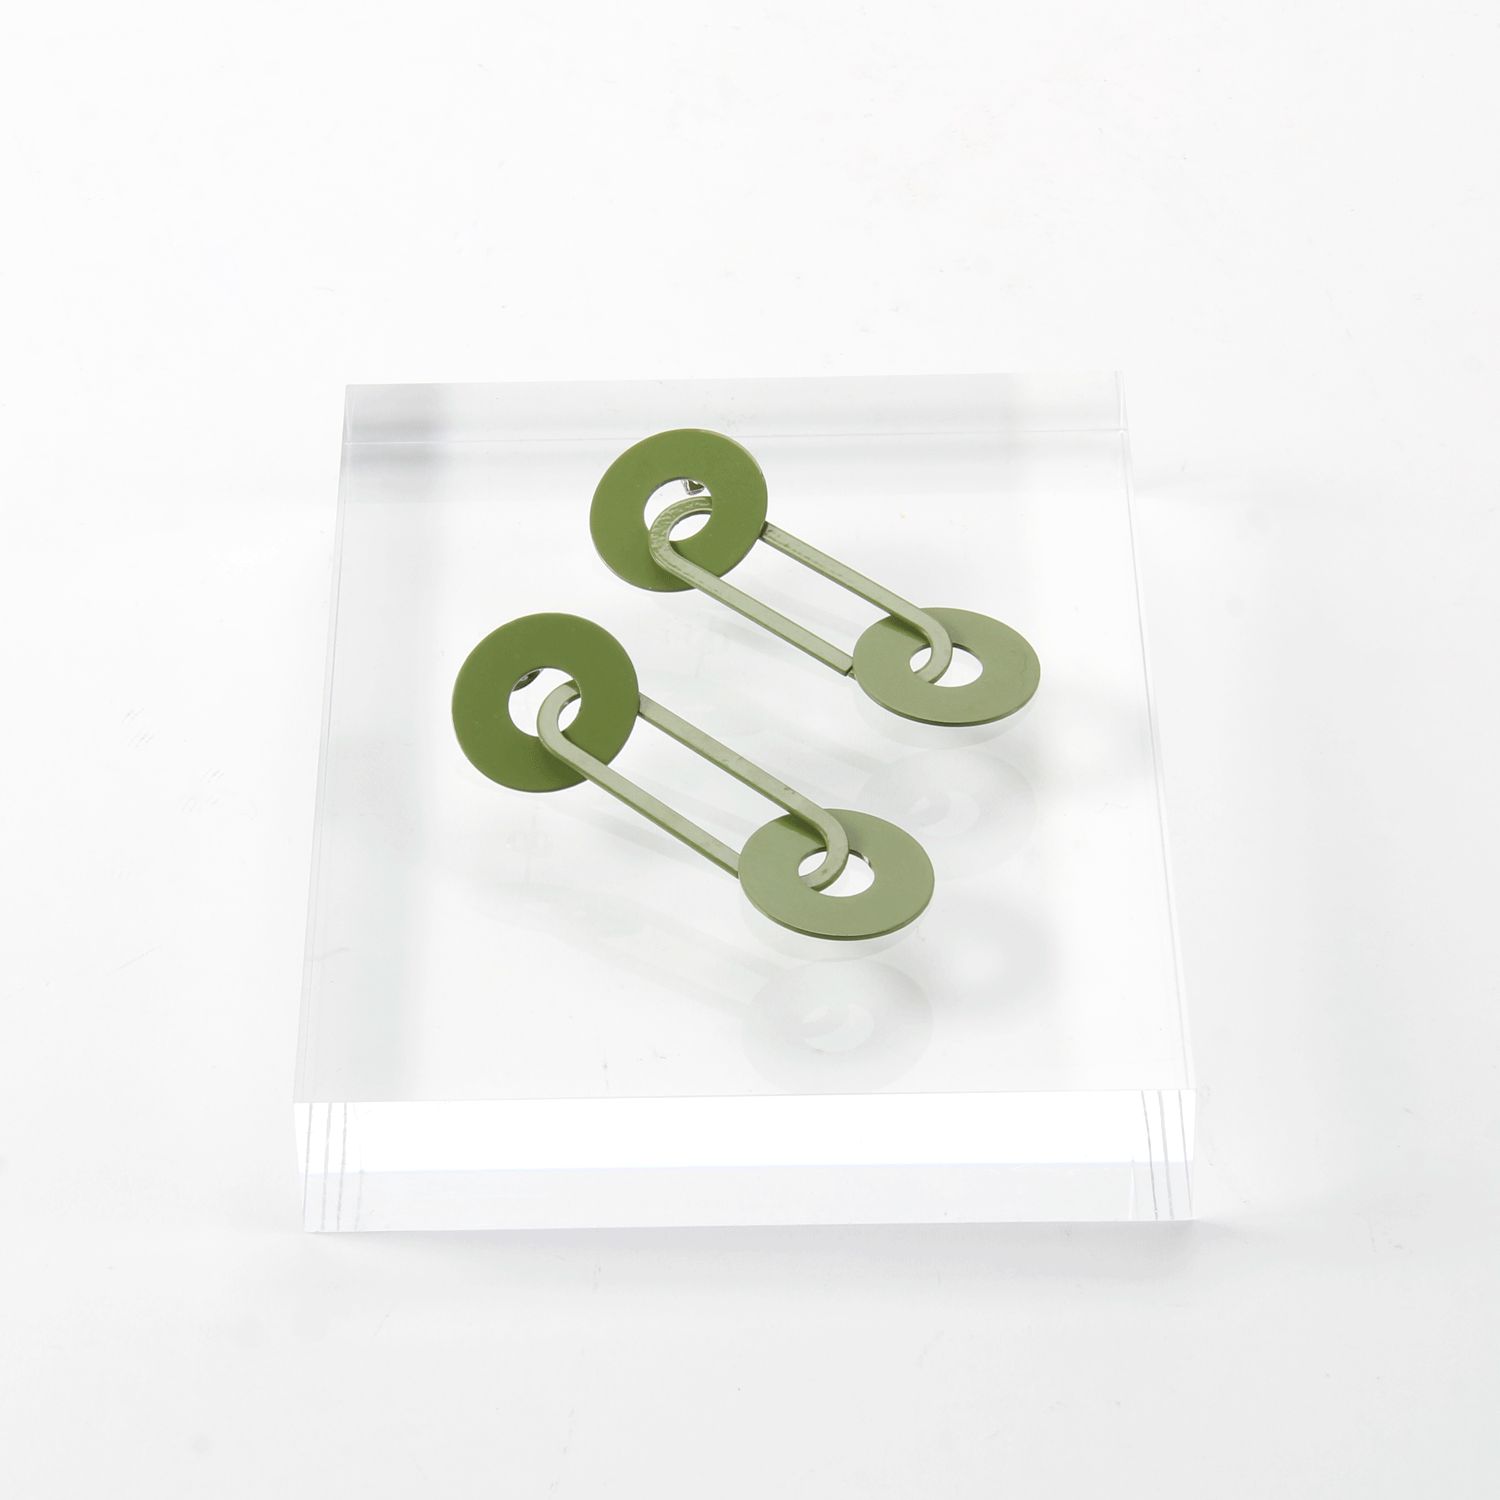 Days of August: The Hague Earrings in Avo Green Product Image 2 of 2